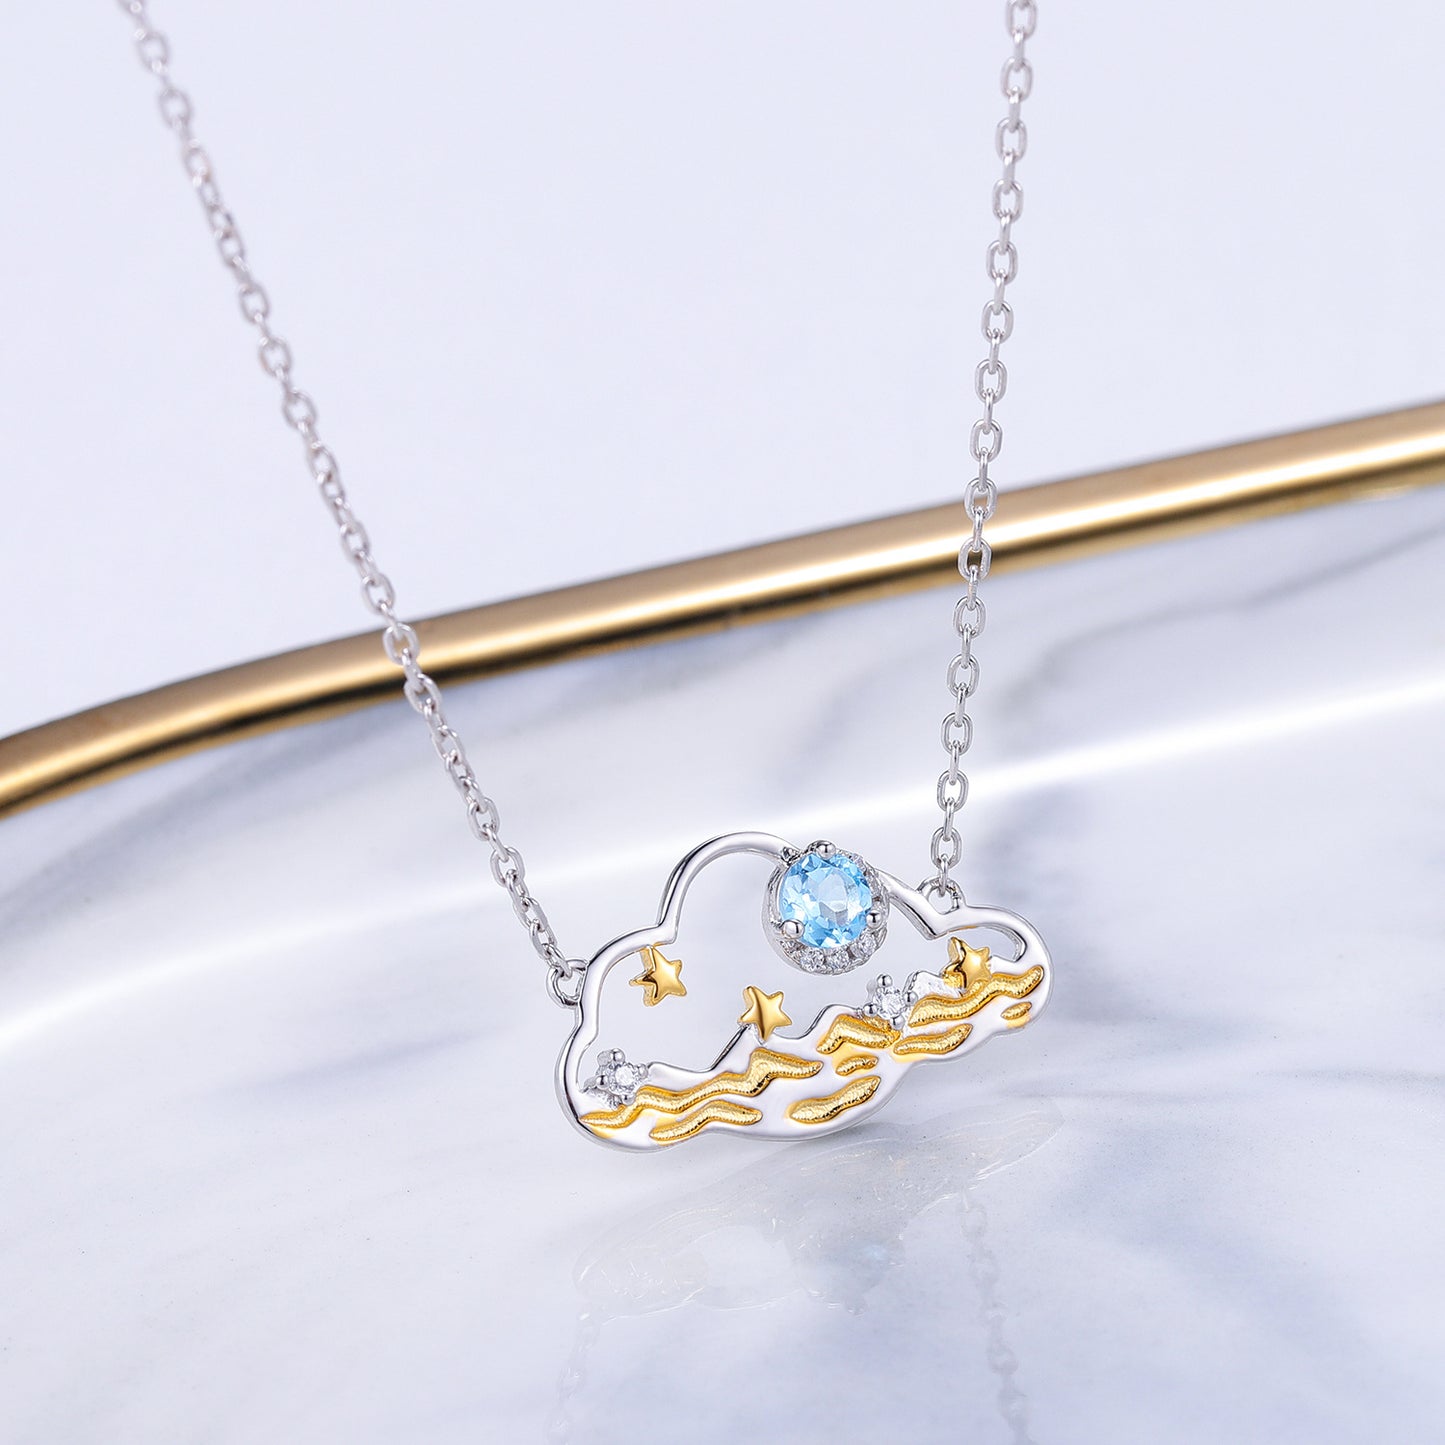 Gemstone Auspicious Cloud and Sea Pendant Sterling Silver Jewelry for Women